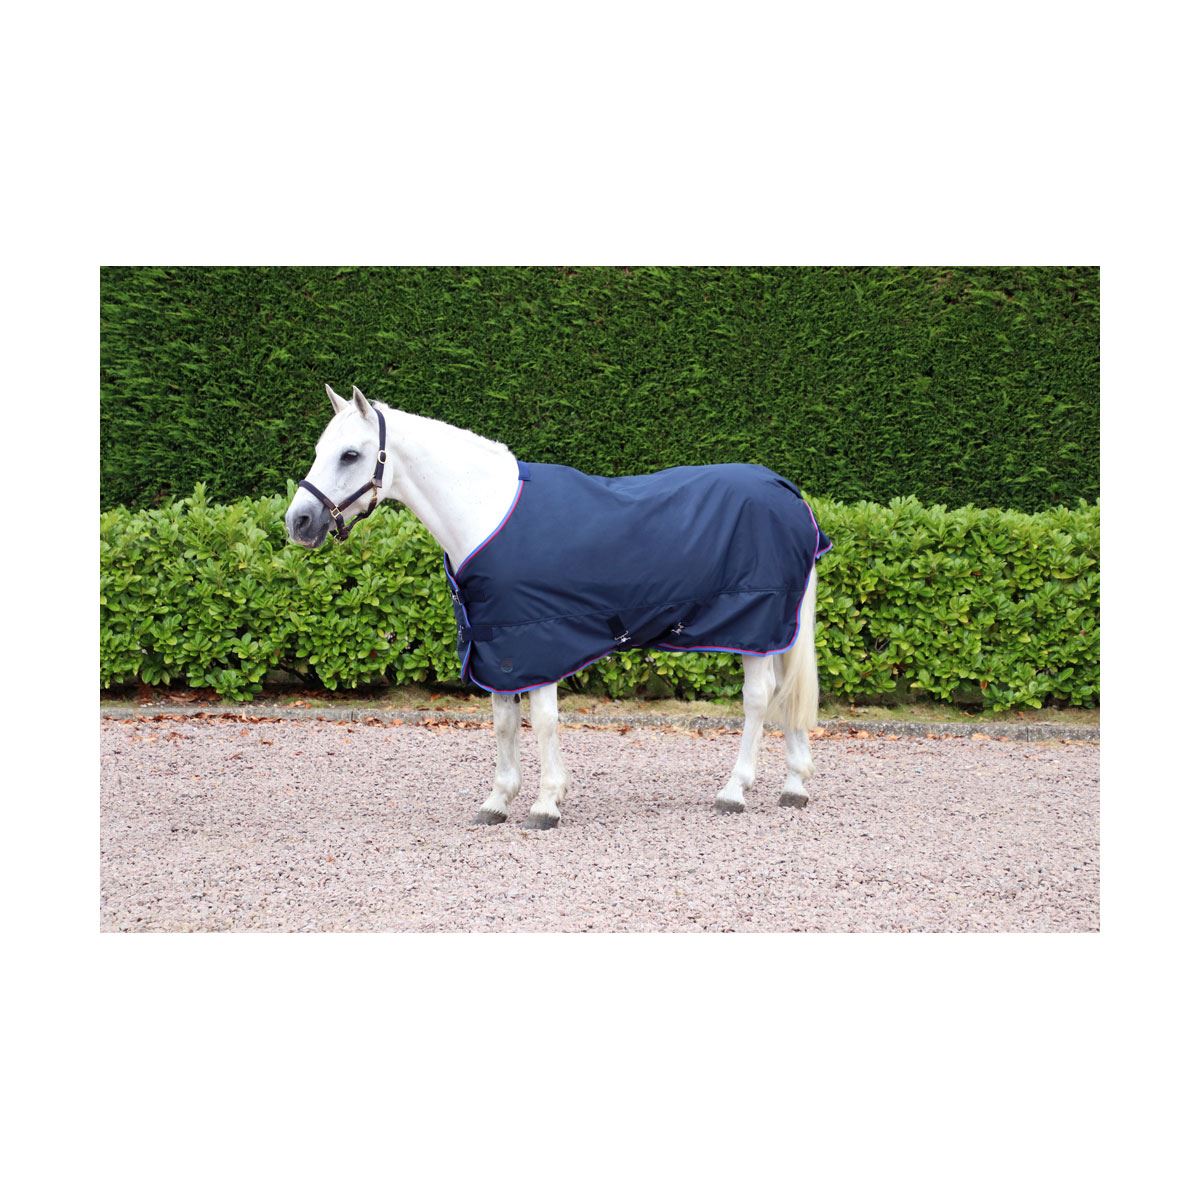 Hy Signature Lightweight 100g Turnout Rug - Just Horse Riders